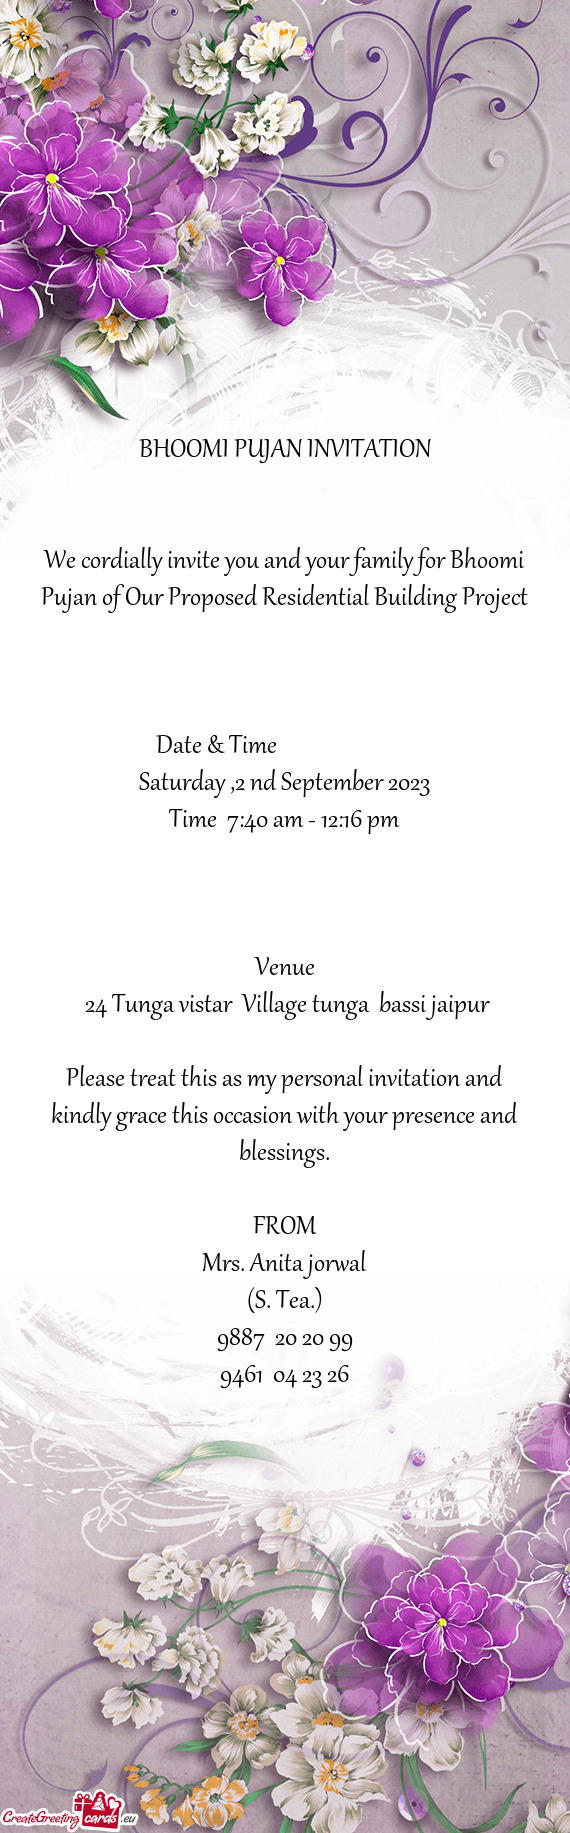 Date & Time।